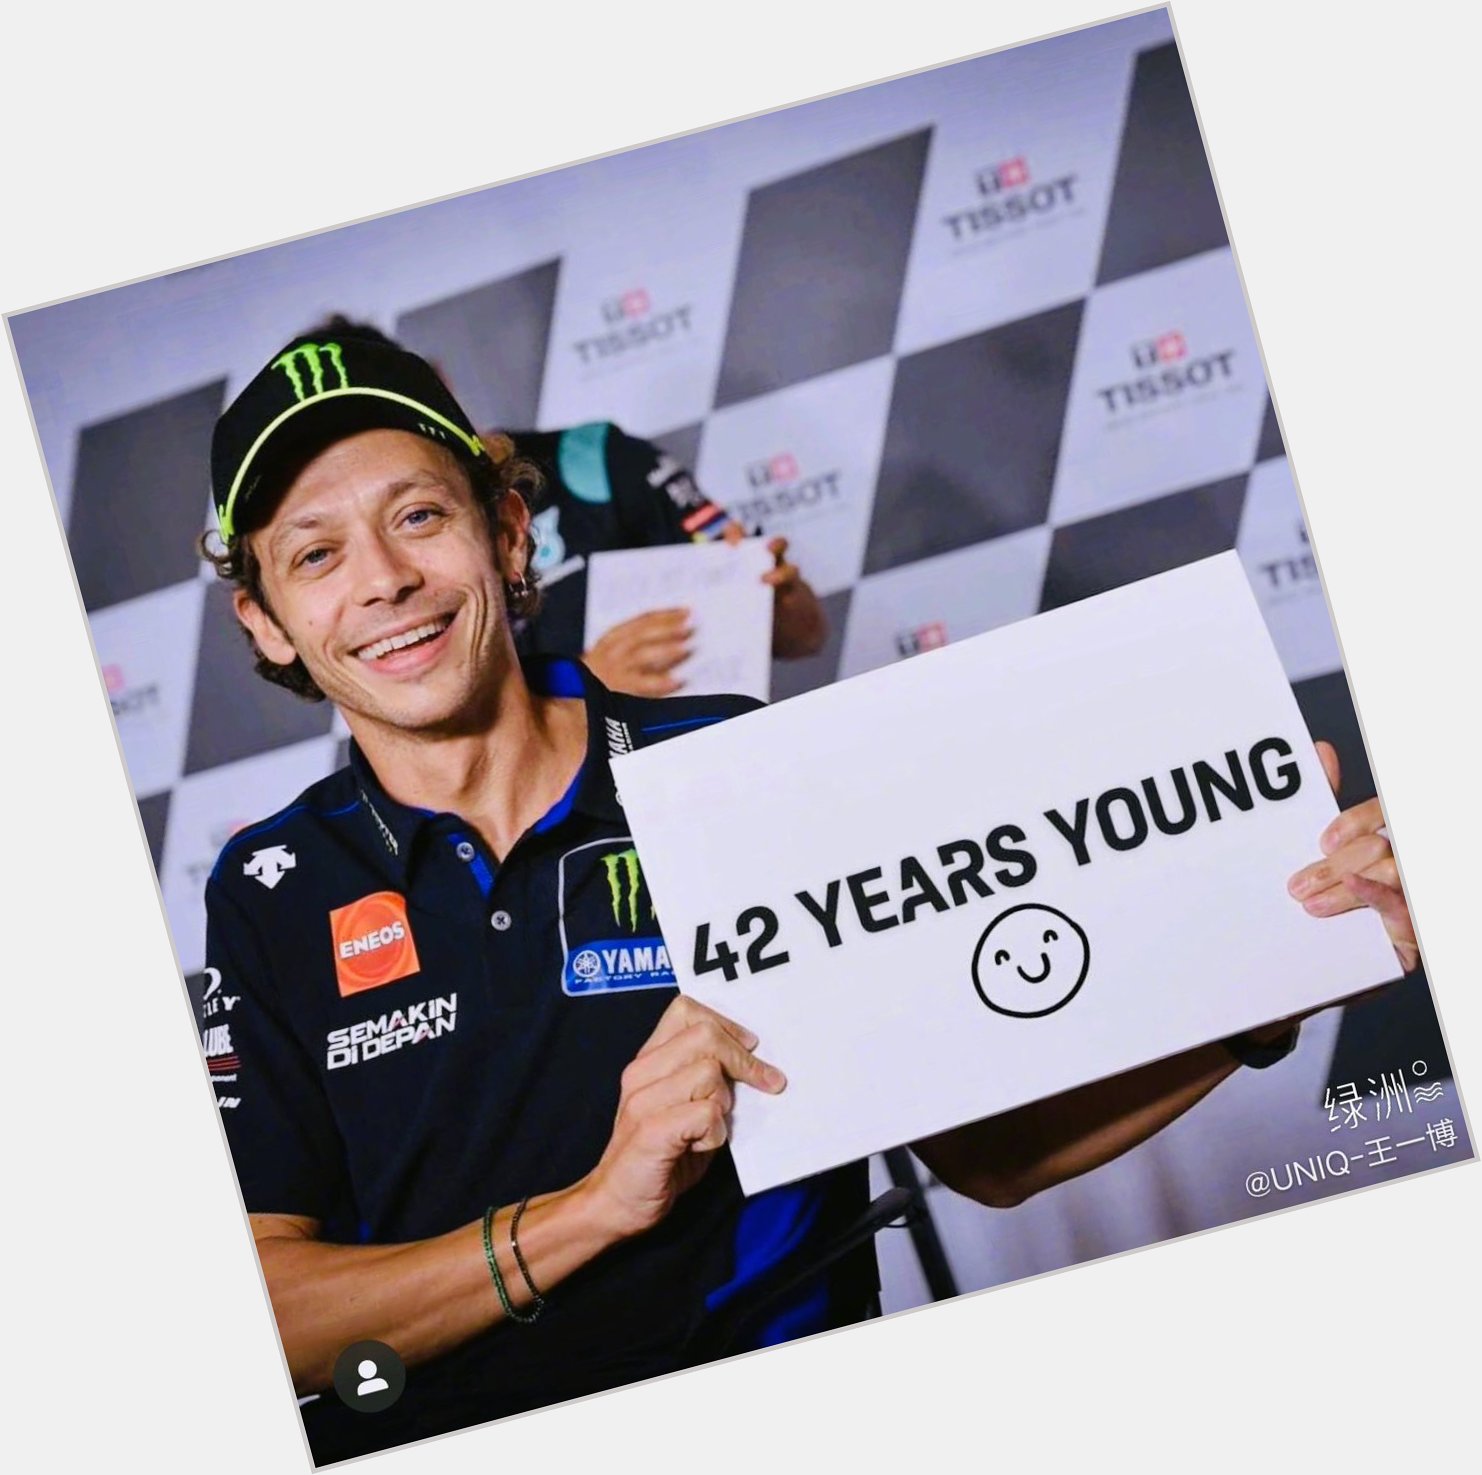 Happy birthday to the muse of my life, my inspiration, my role model. The 46 to my 85, Valentino Rossi. 

cr: MotoGP 